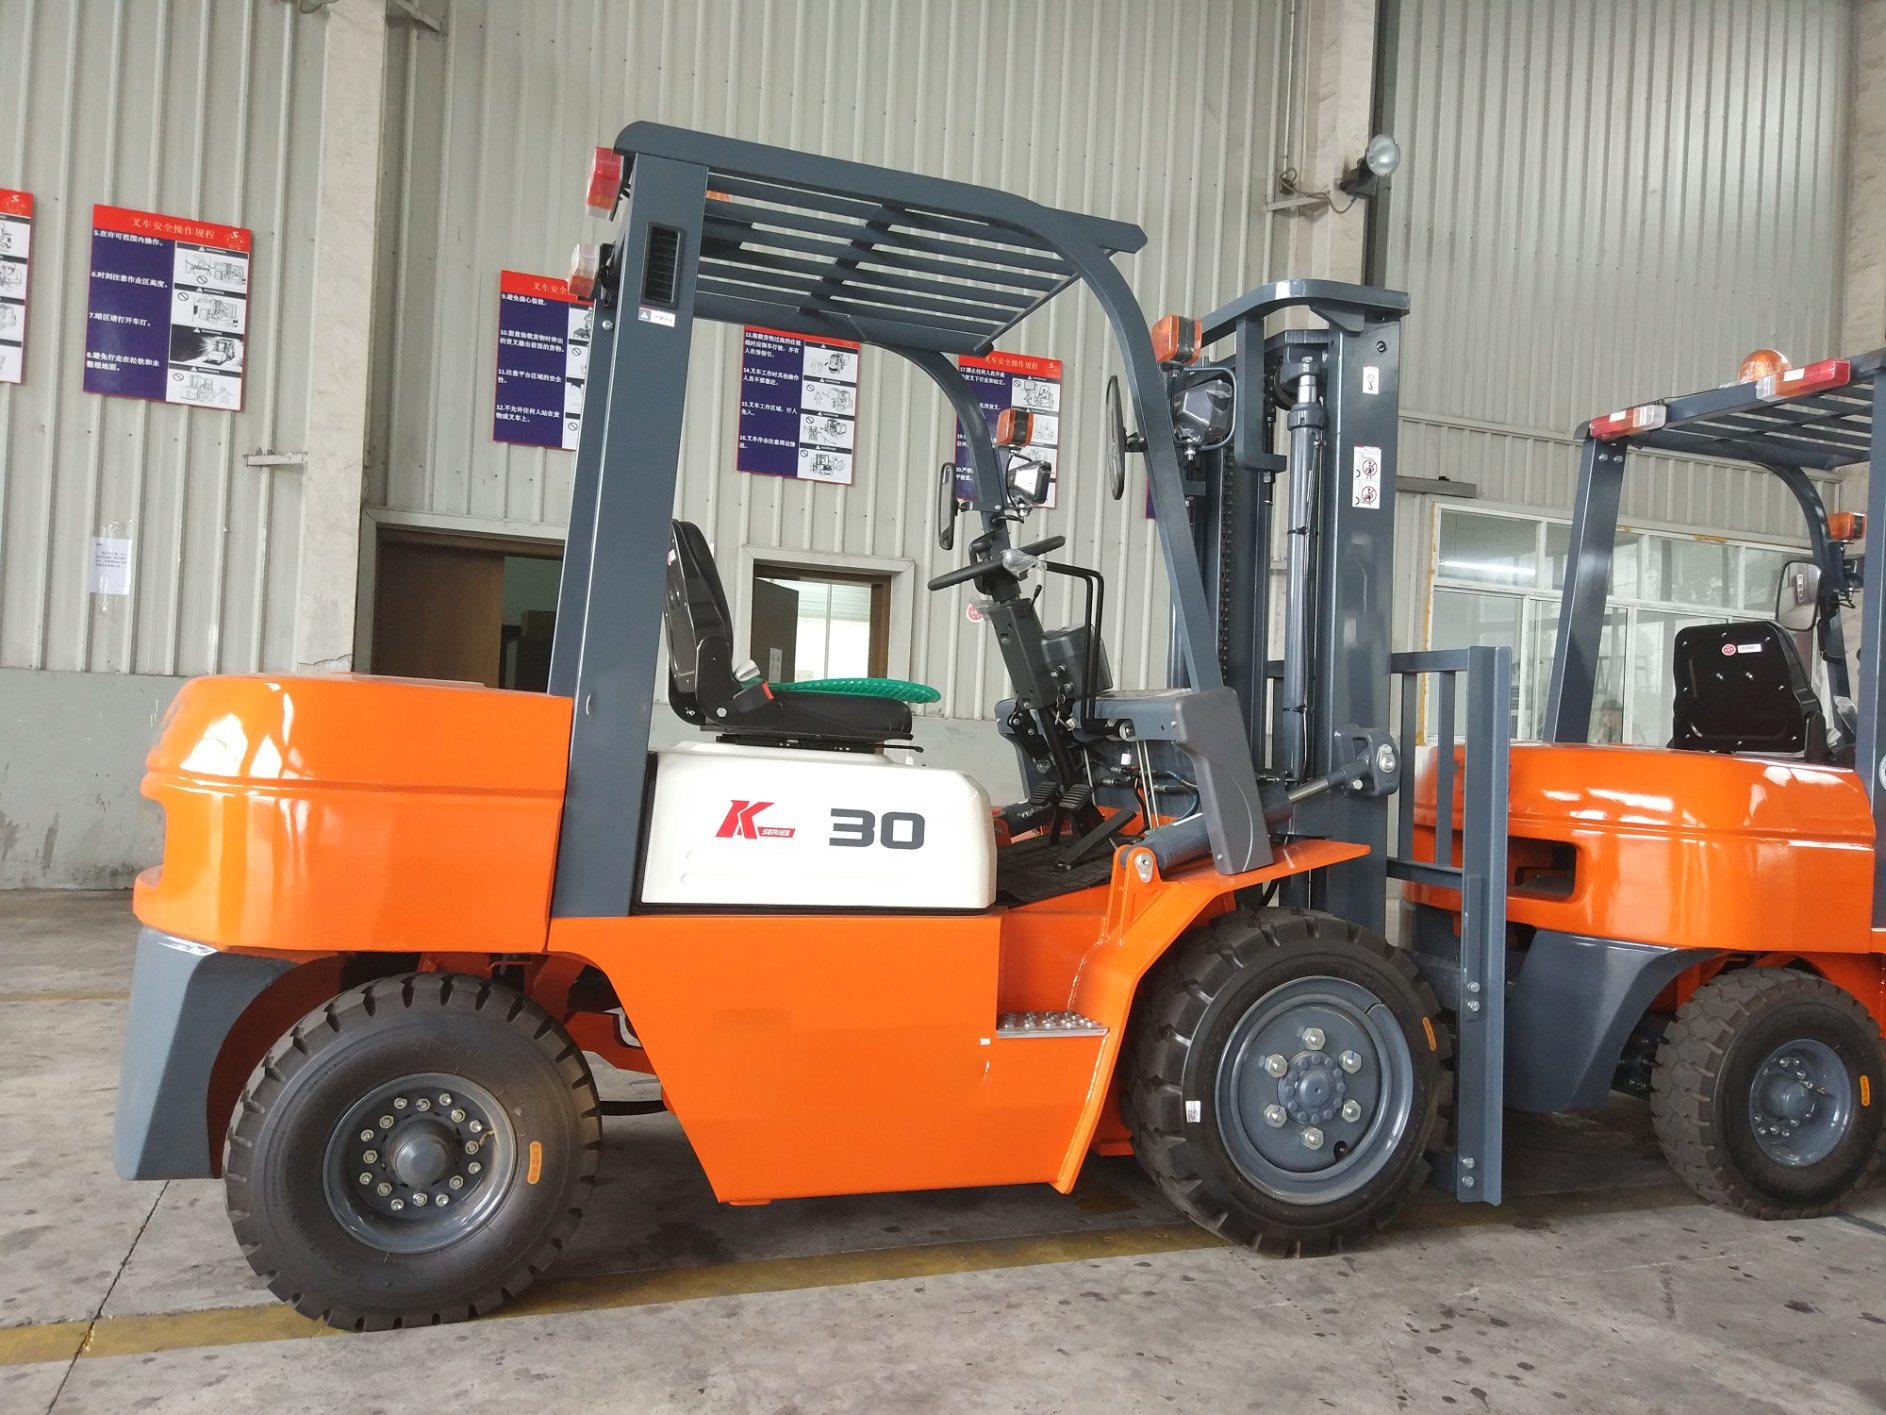 Counterweight 3 T Used Widely Cpcd30 Forklift Offer Higher Safety